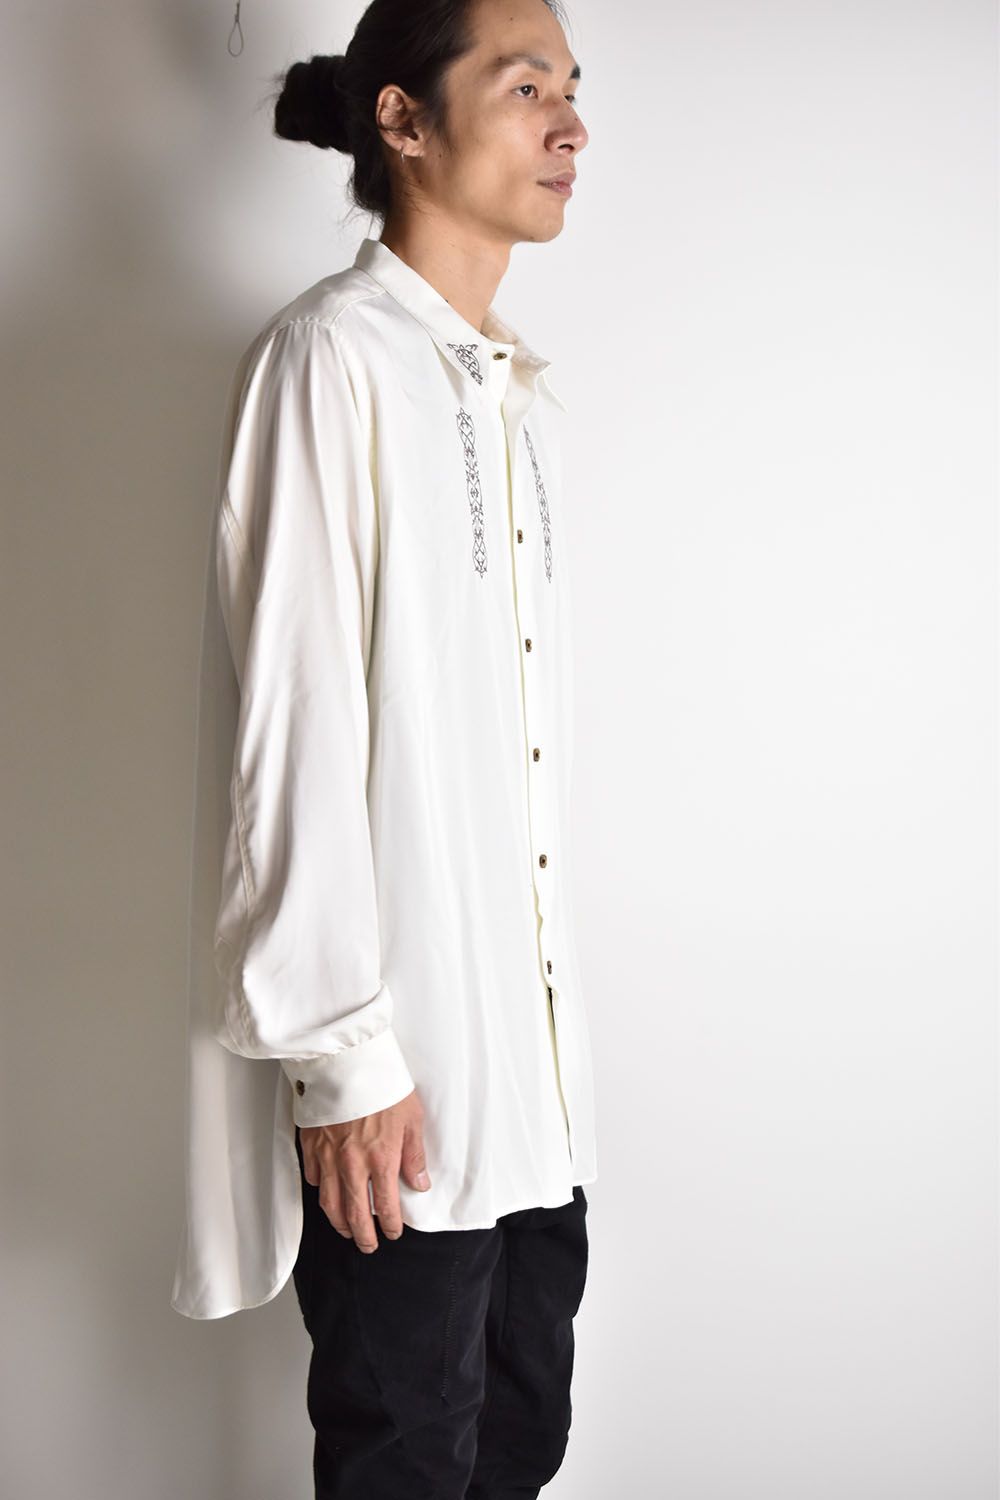 Embroidery Long Shirts"Off White"/ 刺繍ロングシャツ"オフホワイト"